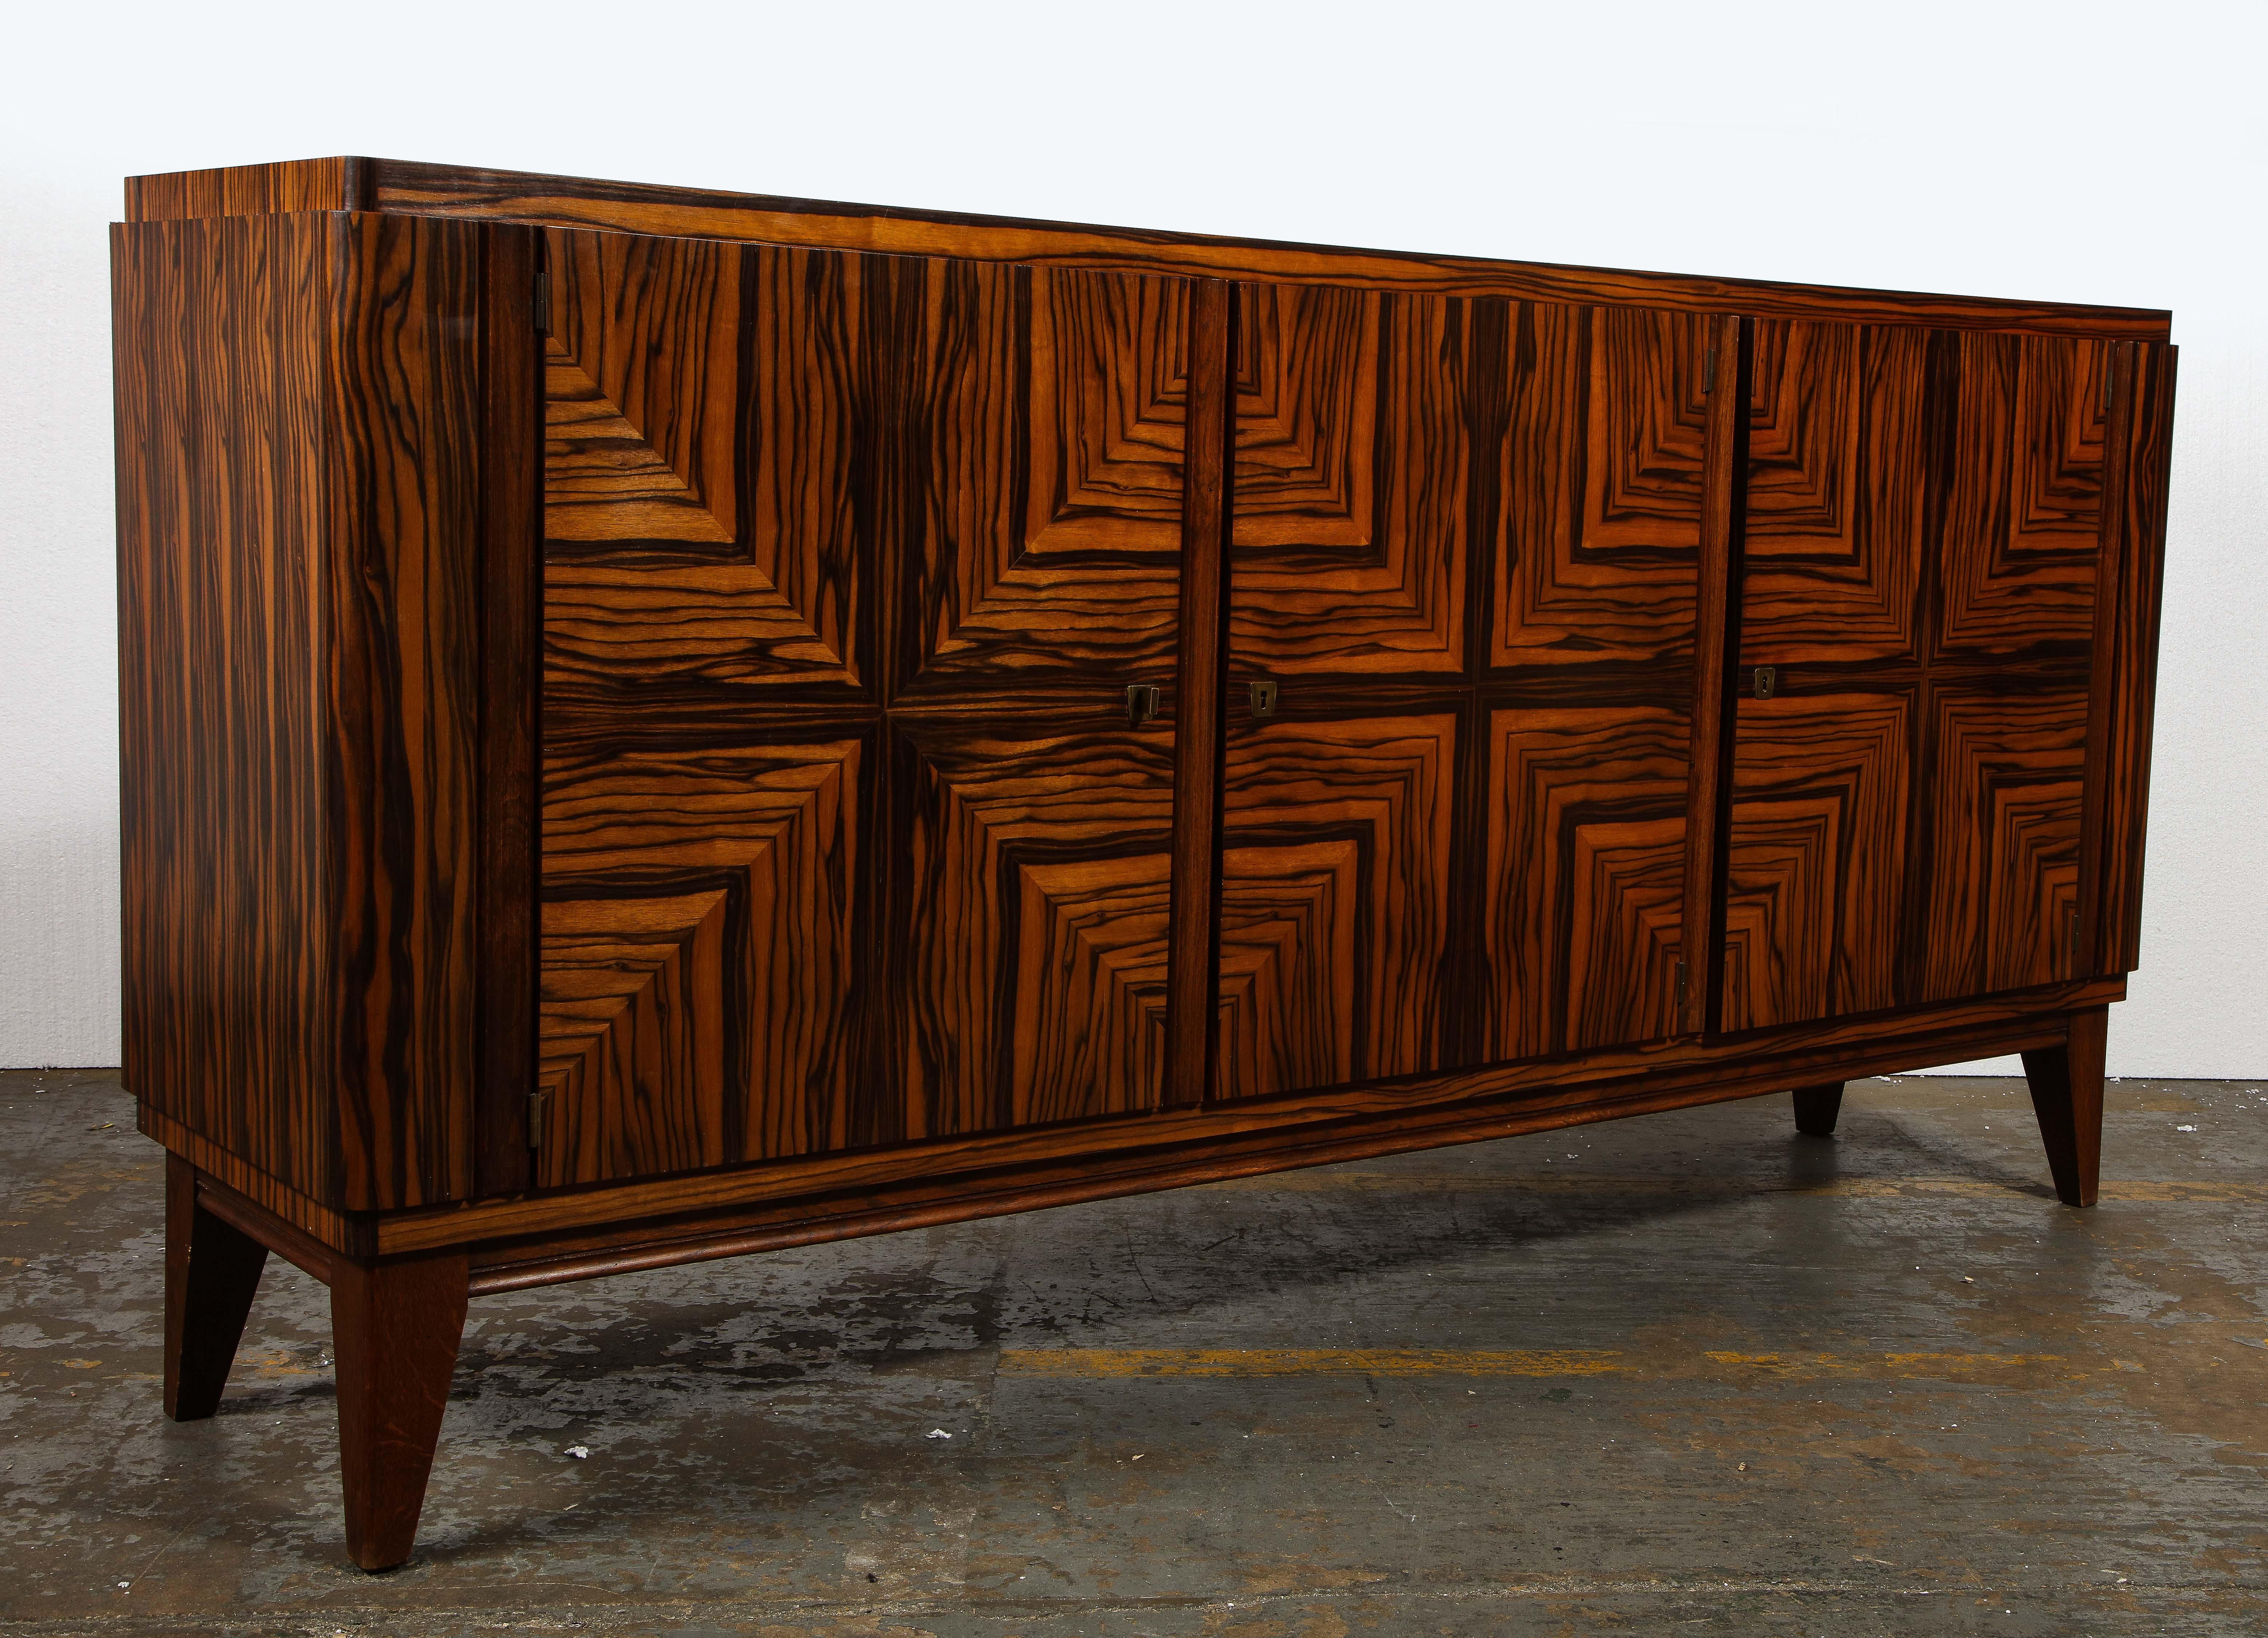 French midcentury zebra wood buffet sideboard, 1950s

Incredible geometric wood detailing throughout. French midcentury solid wood sideboard. 

Measures: 85 inches wide
20 inches deep
42 inches high.